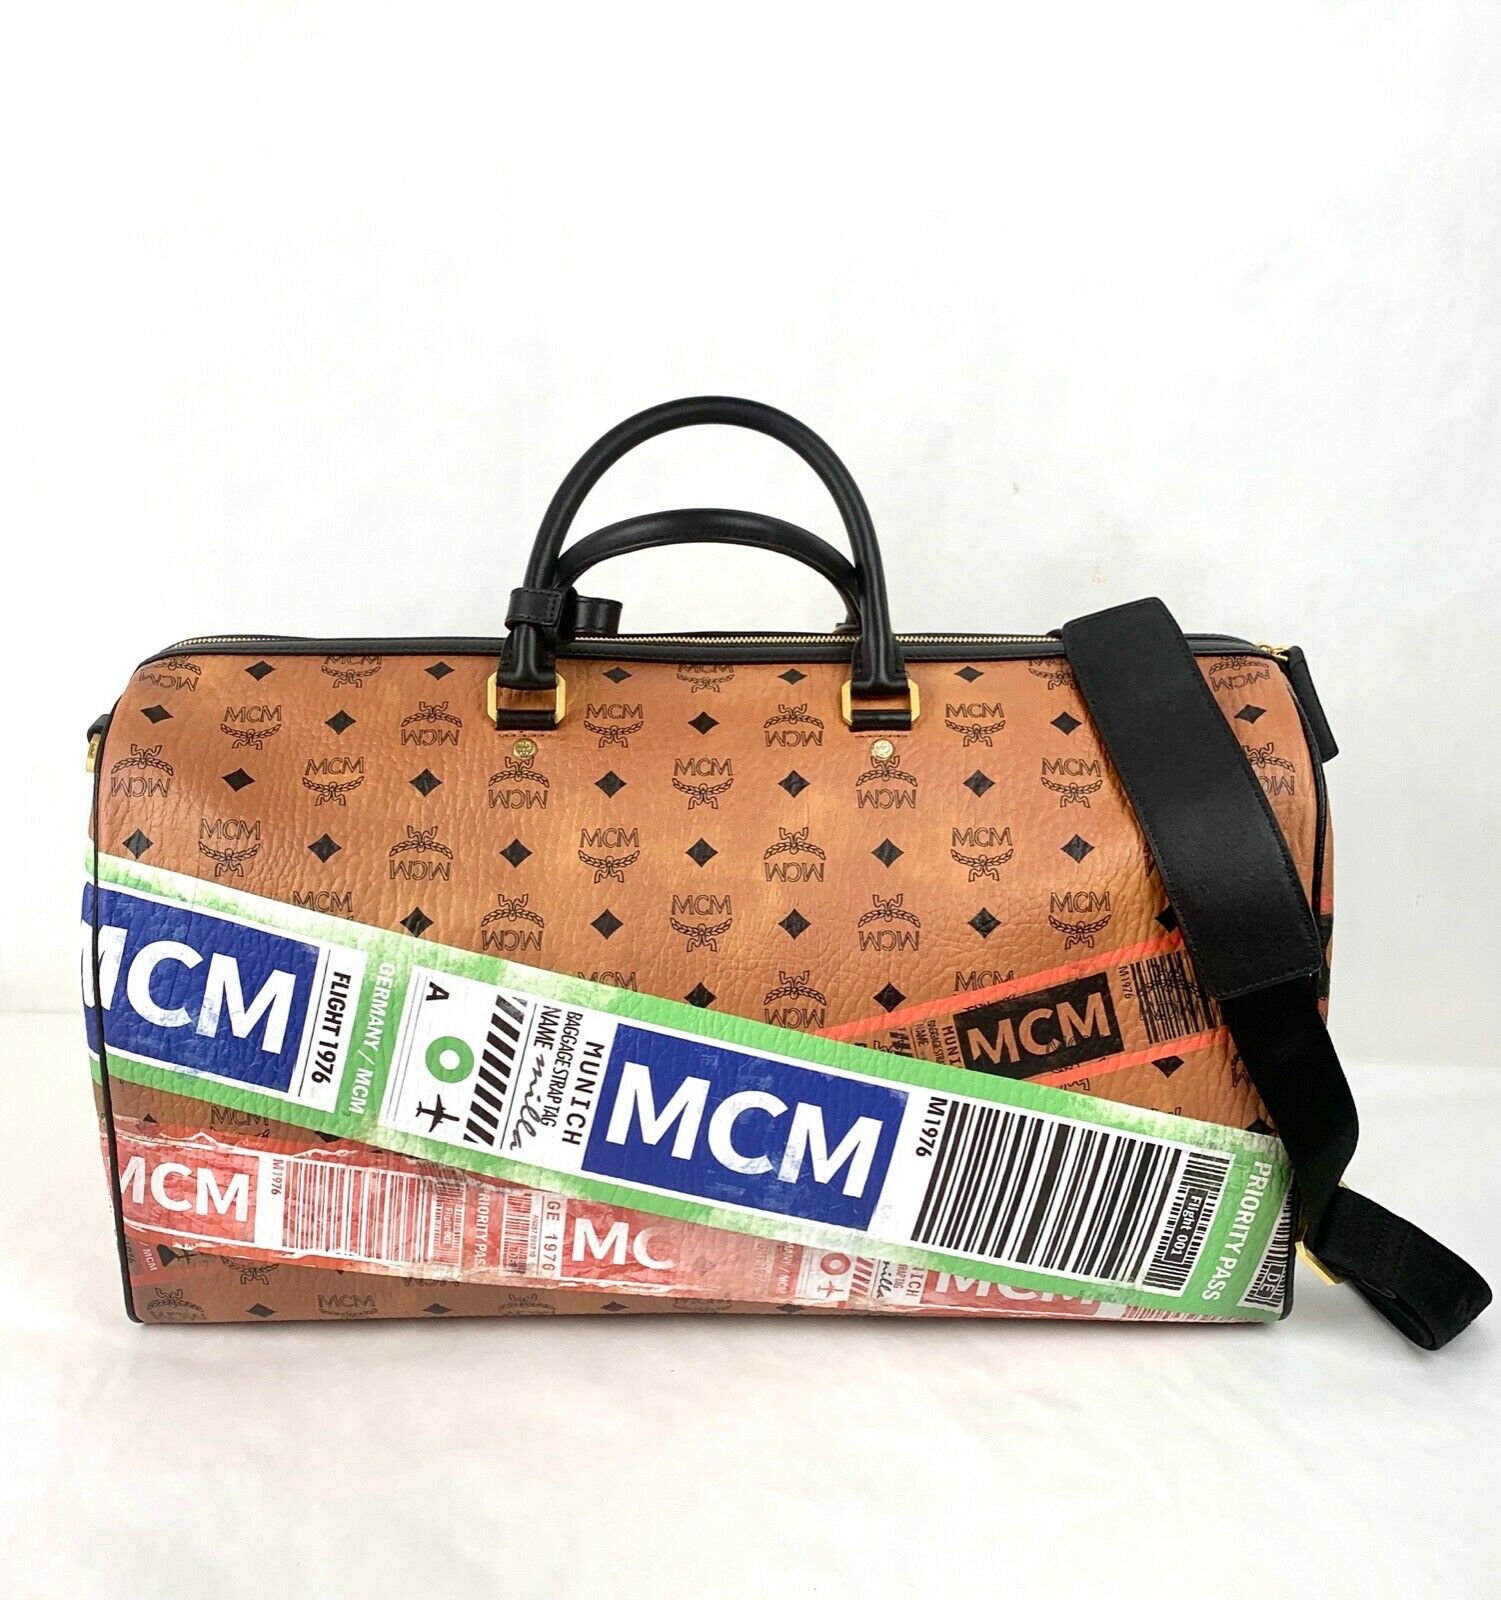 MCM Visetos Carry On Duffle - Brown Luggage and Travel, Handbags - W3049764